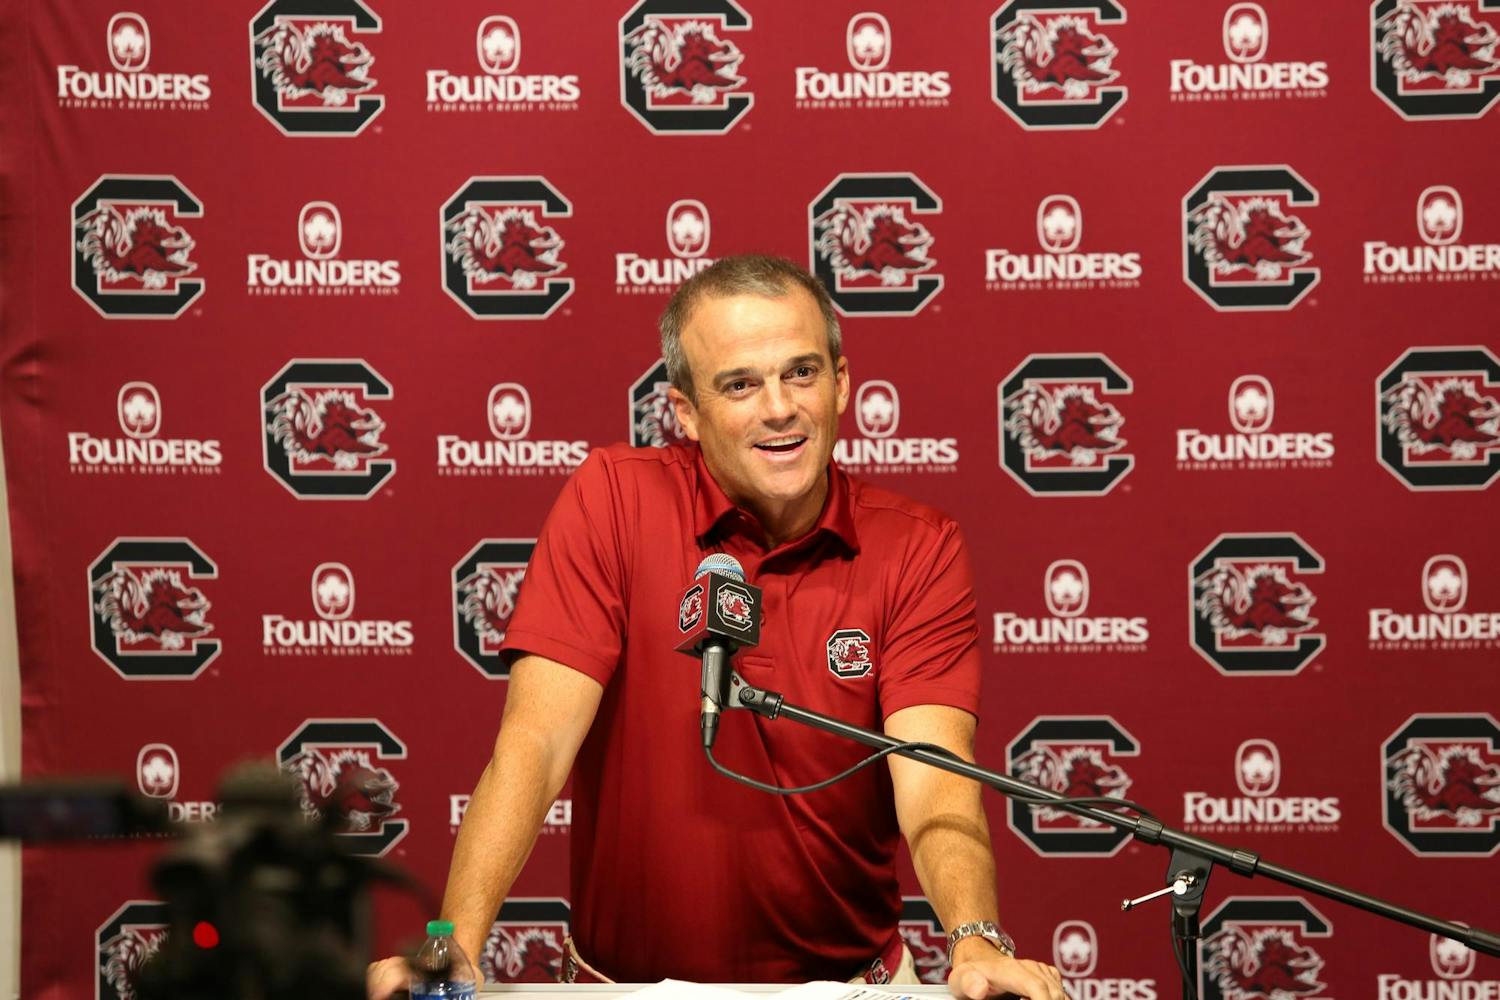 Head coach Shane Beamer reflects on the past weekend's game against the University of North Carolina during the press conference on Sept. 5, 2023. Coach Beamer discussed the team's early 鶹С򽴫ý performance and practice attitude ahead of its contest against Furman this weekend.